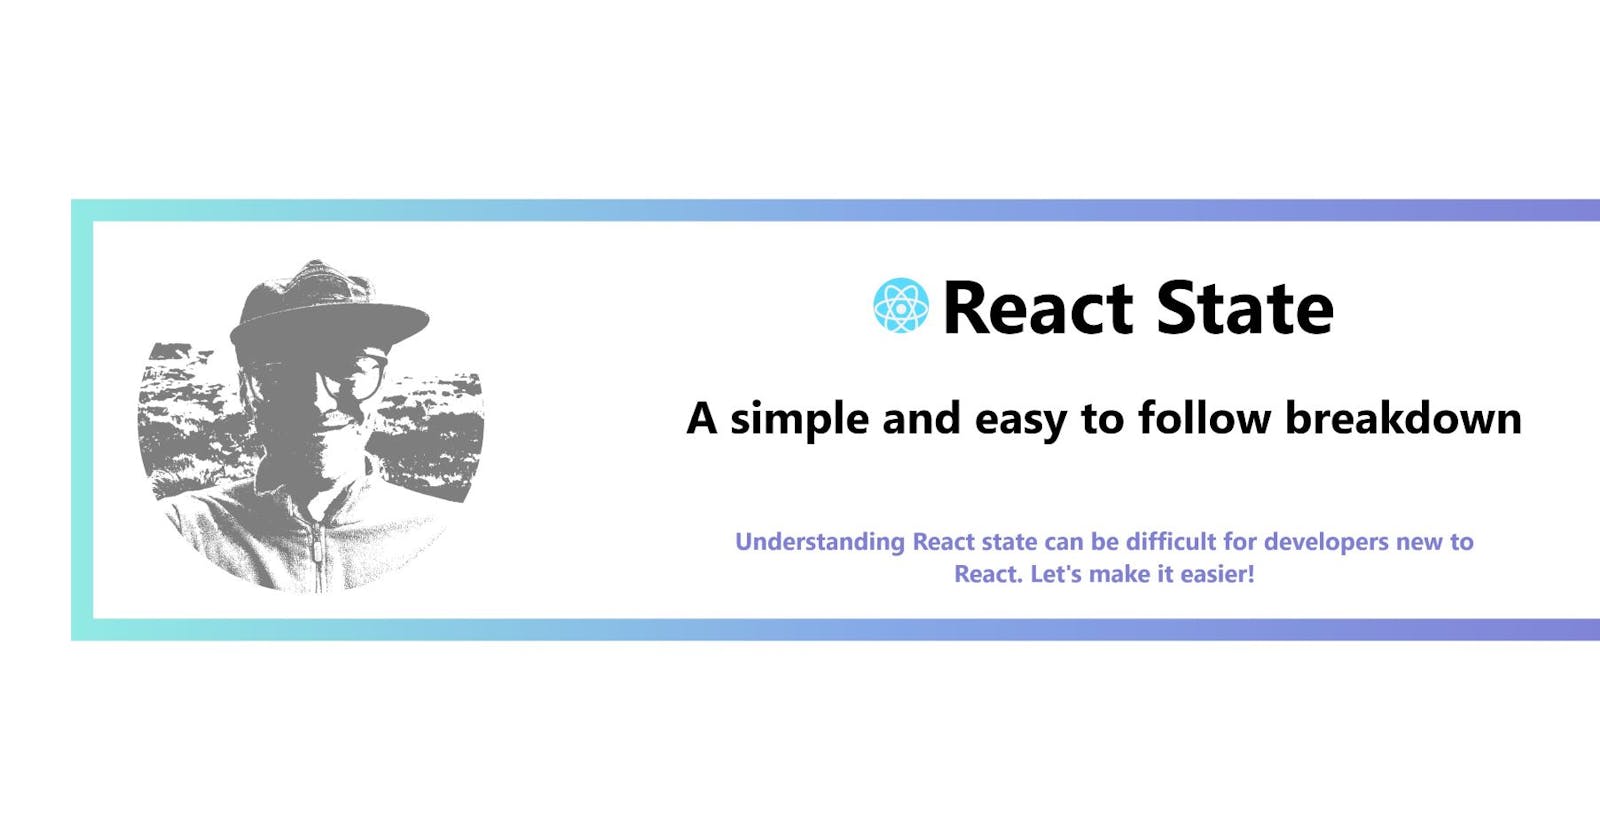 React State: A simple and easy to follow breakdown